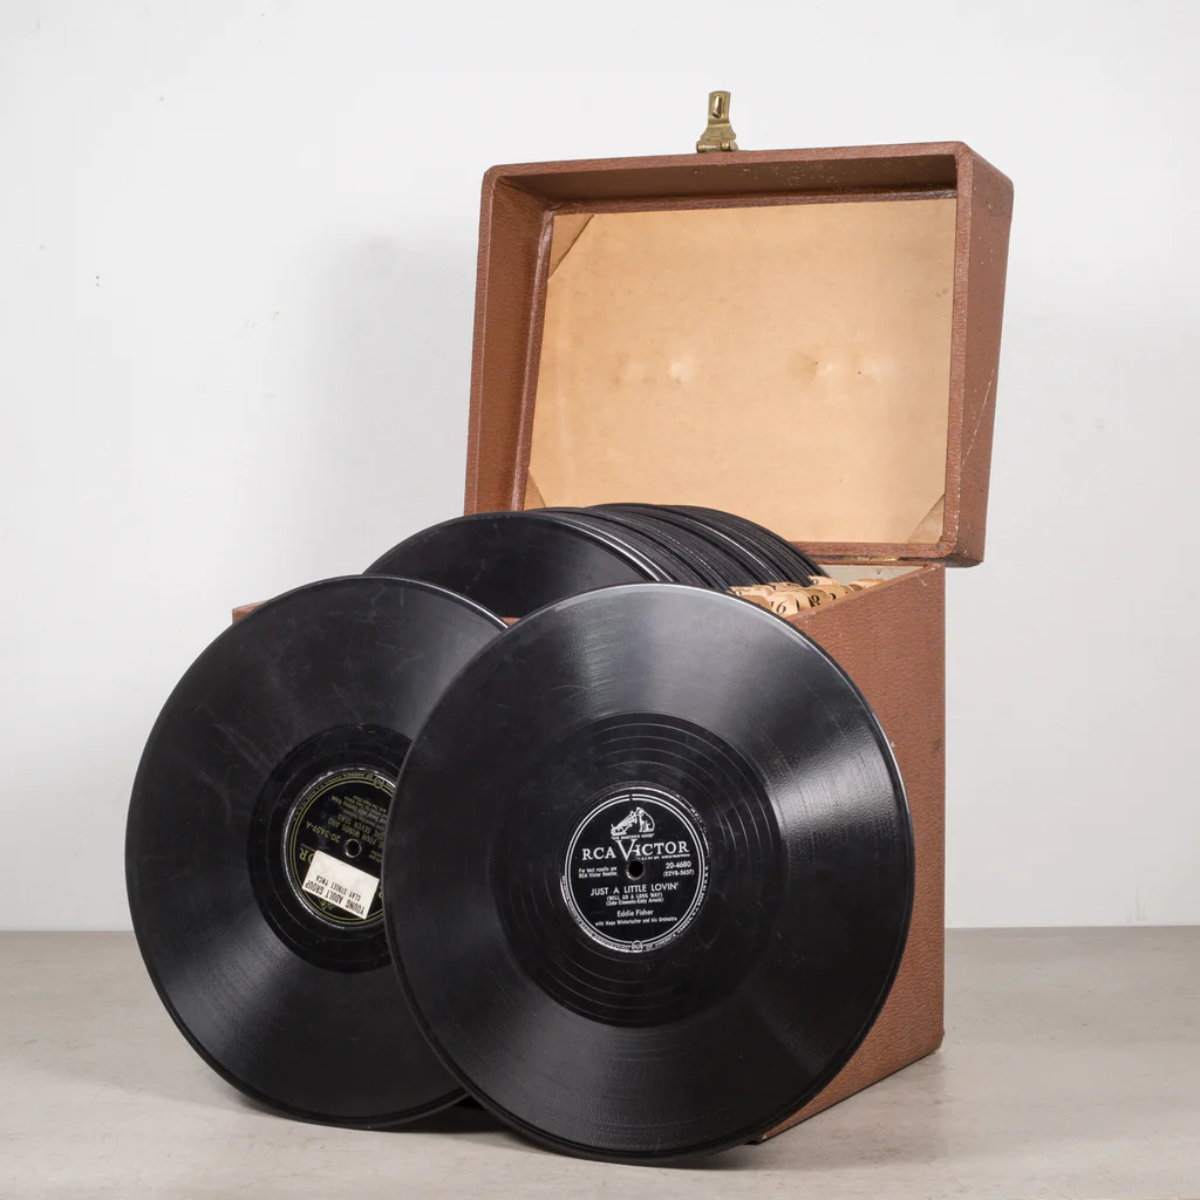 25. Vintage Vinyl of Your Song: A Unique and Personalized Anniversary Gift for Him